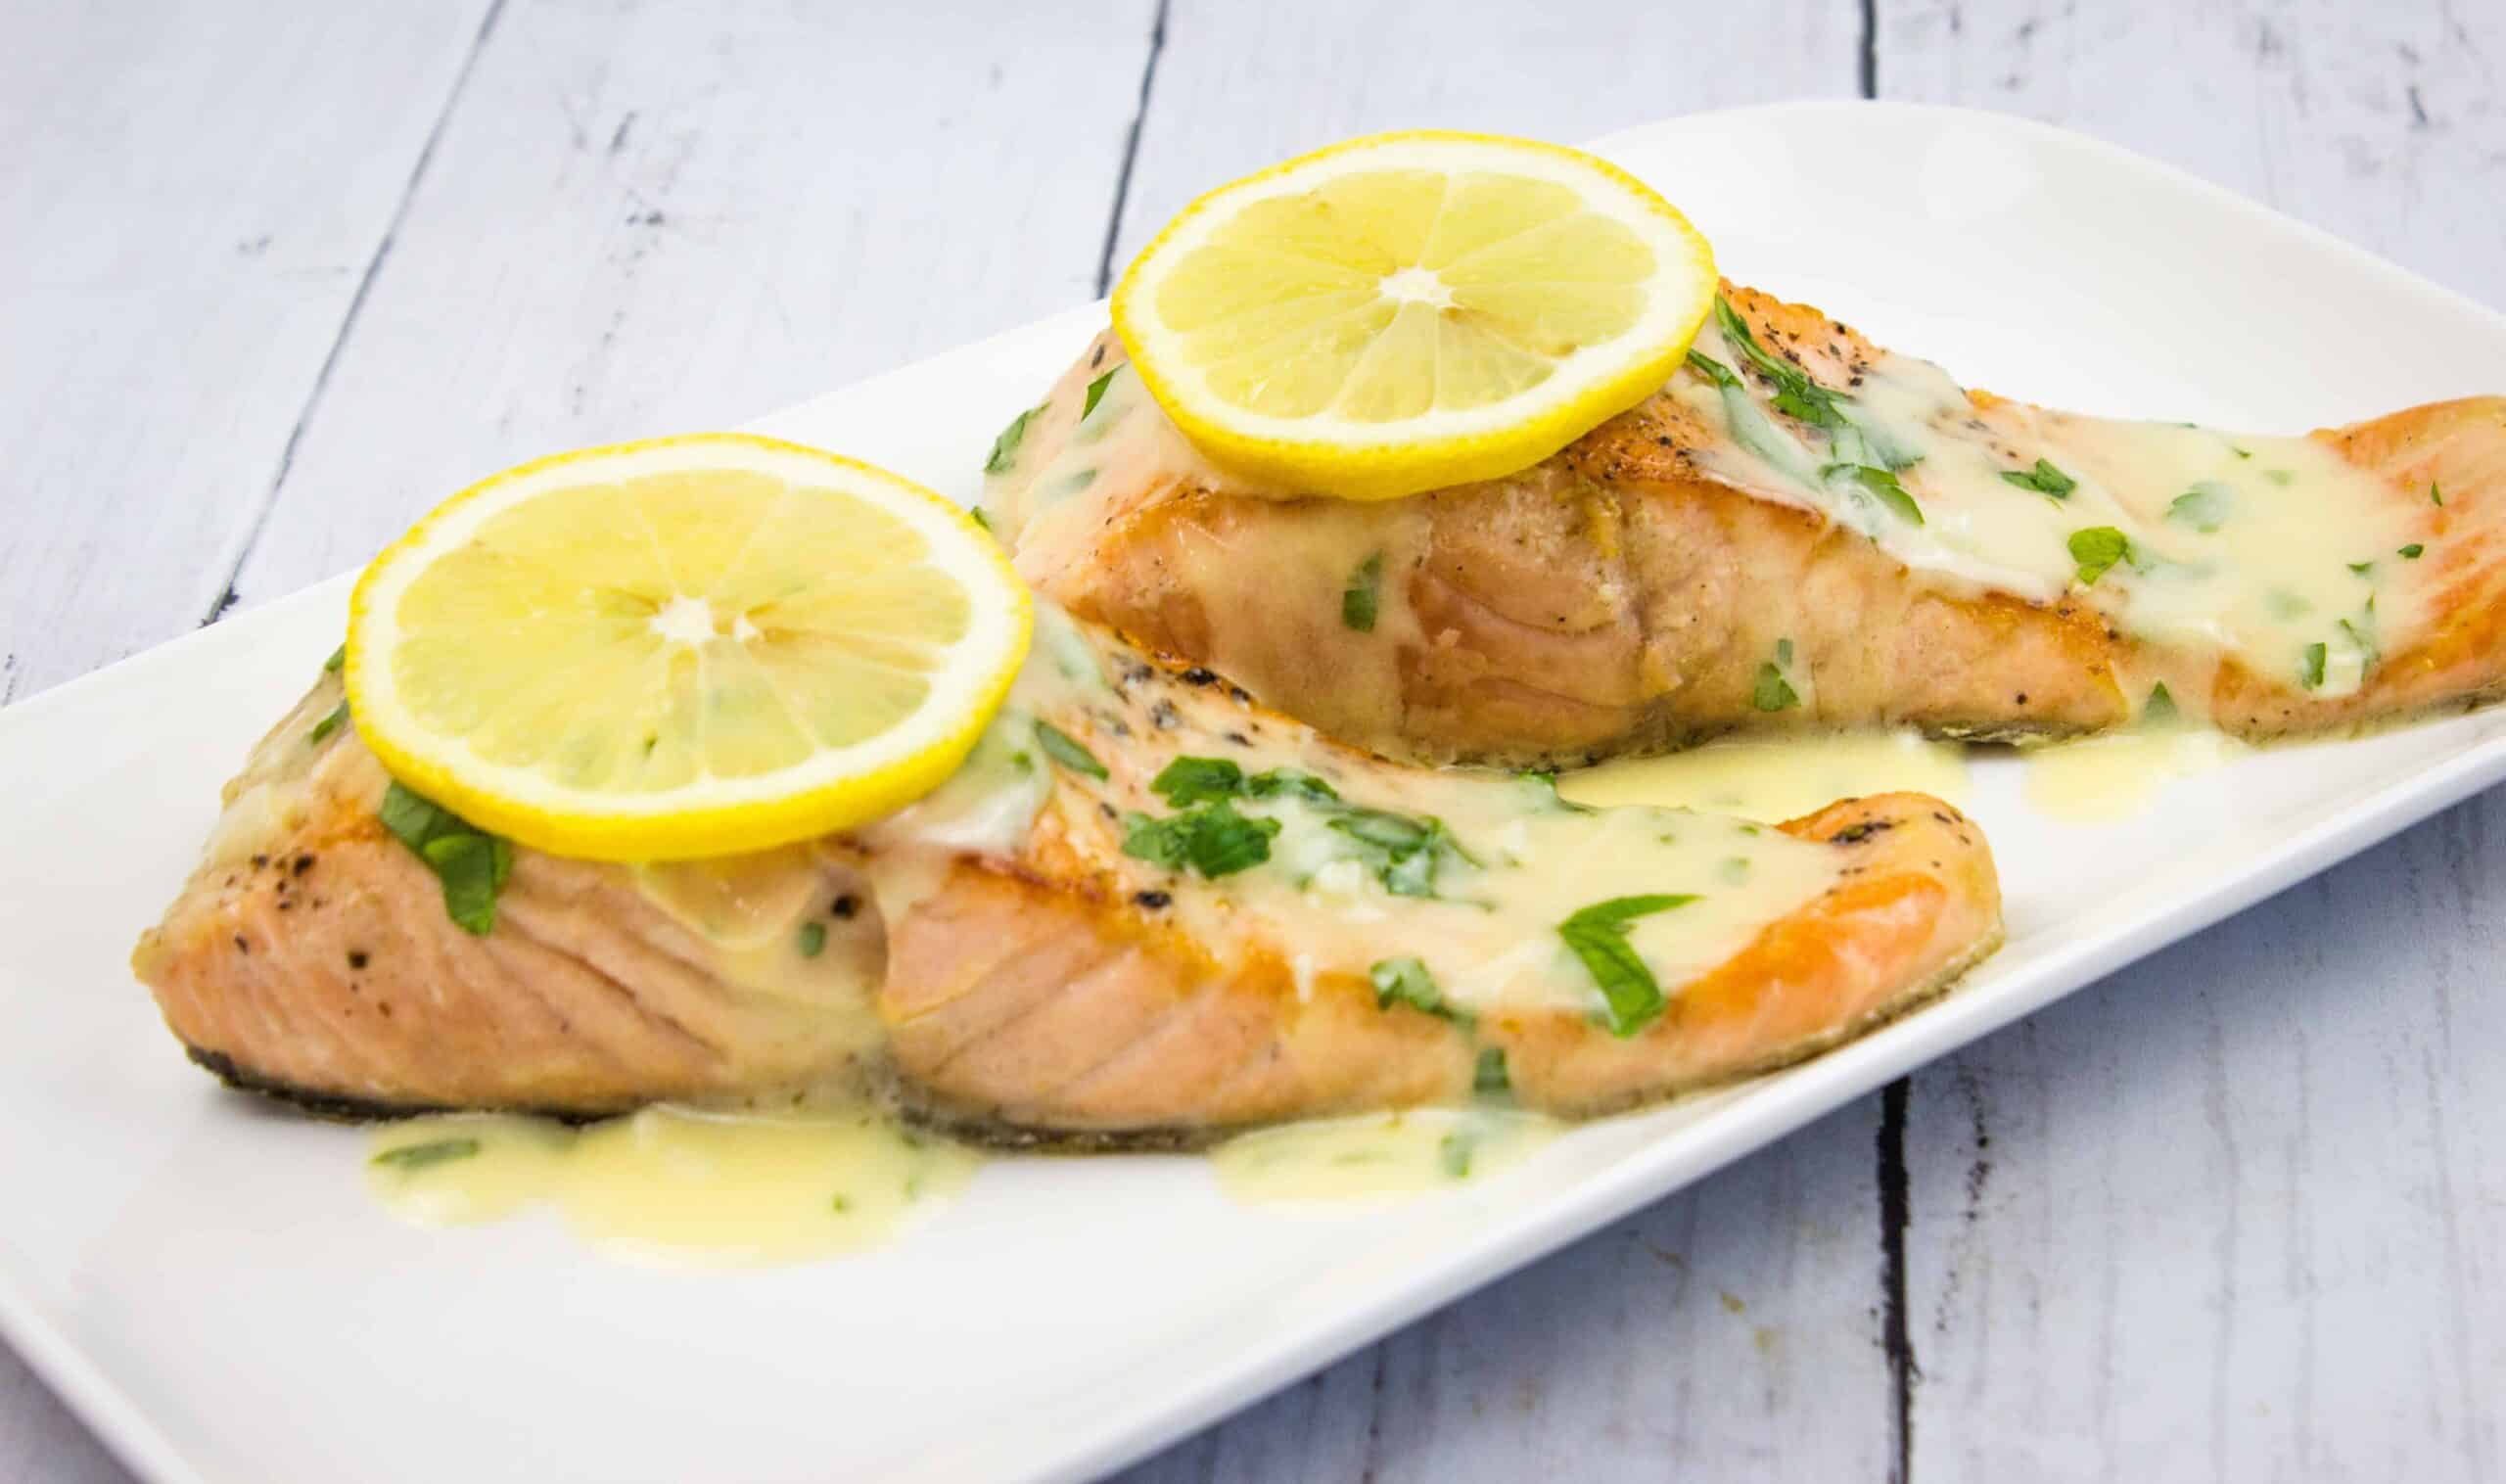 Two salmon fillets with lemon sauce on a white plate.